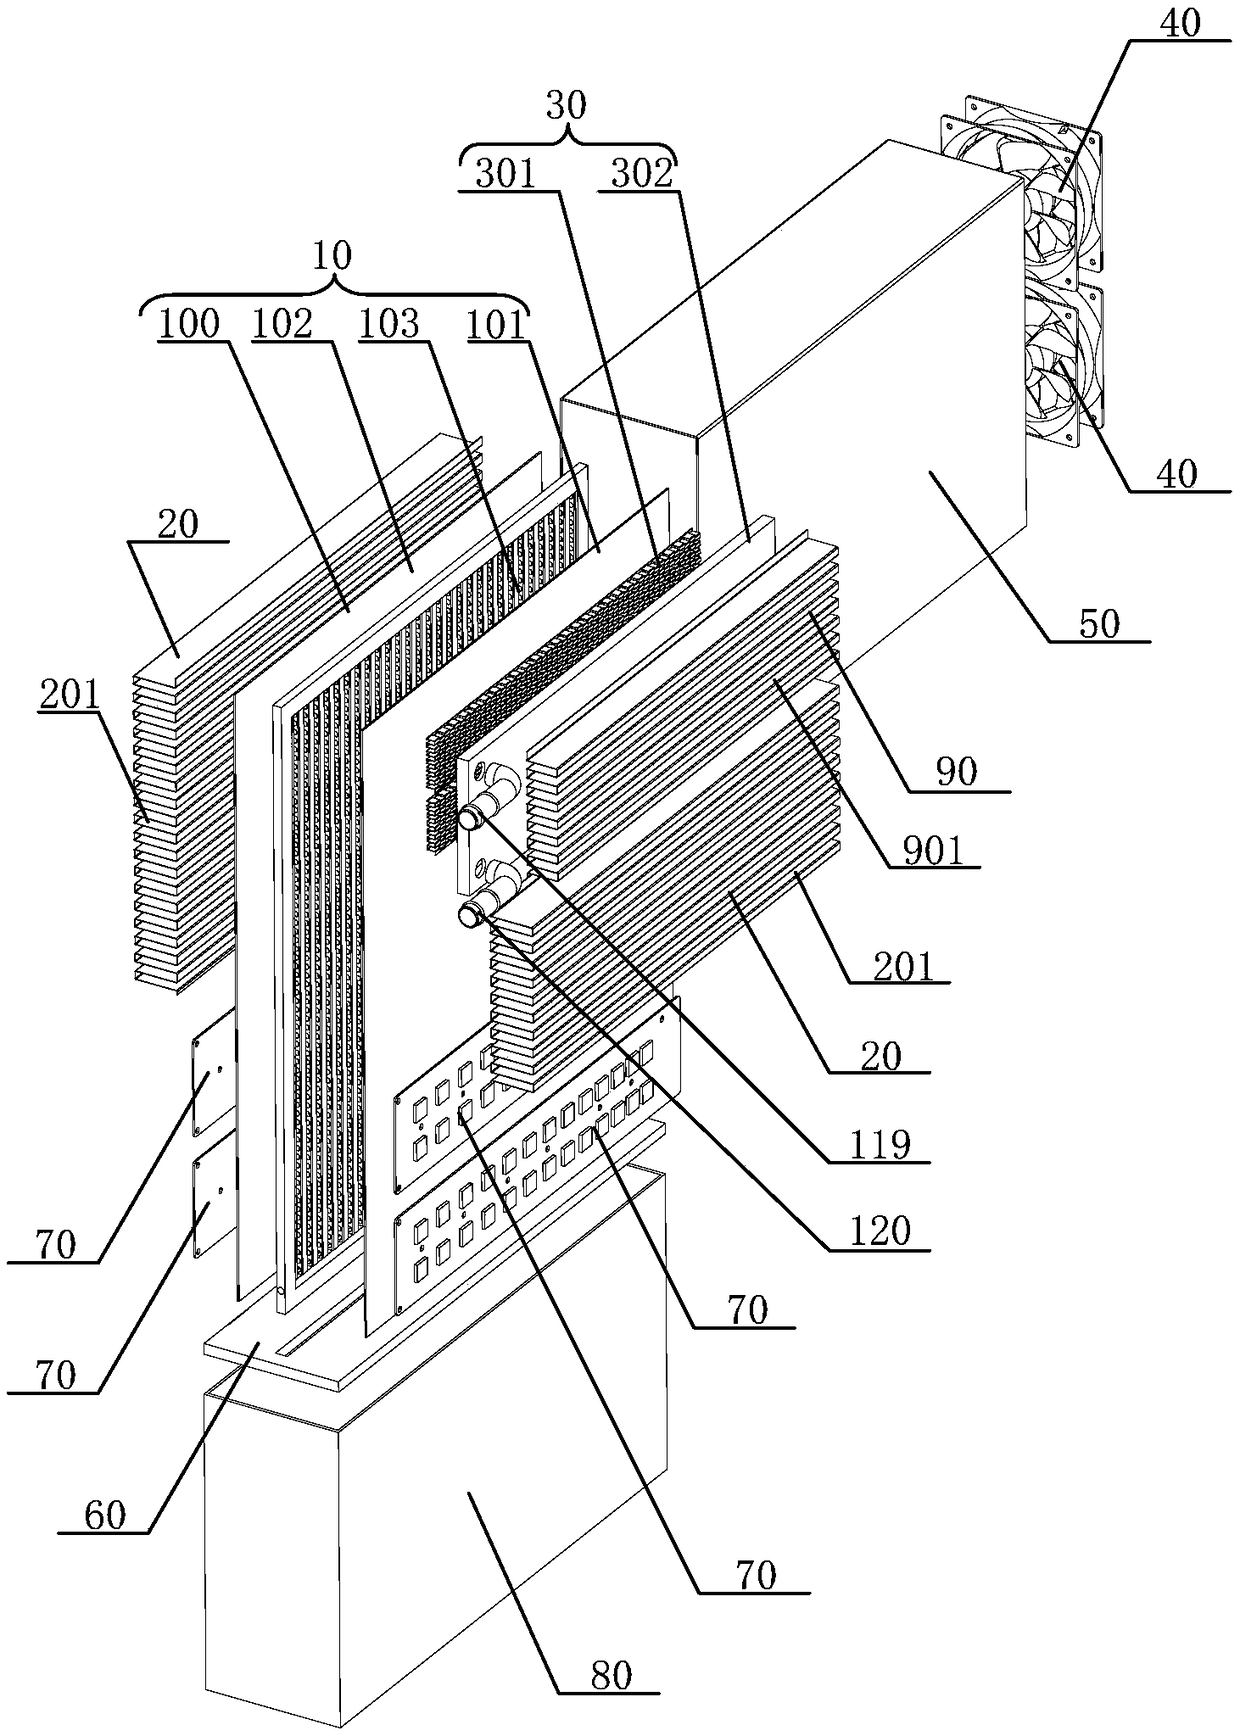 Air-cooled liquid-cooled combined thermally superconducting plate radiator